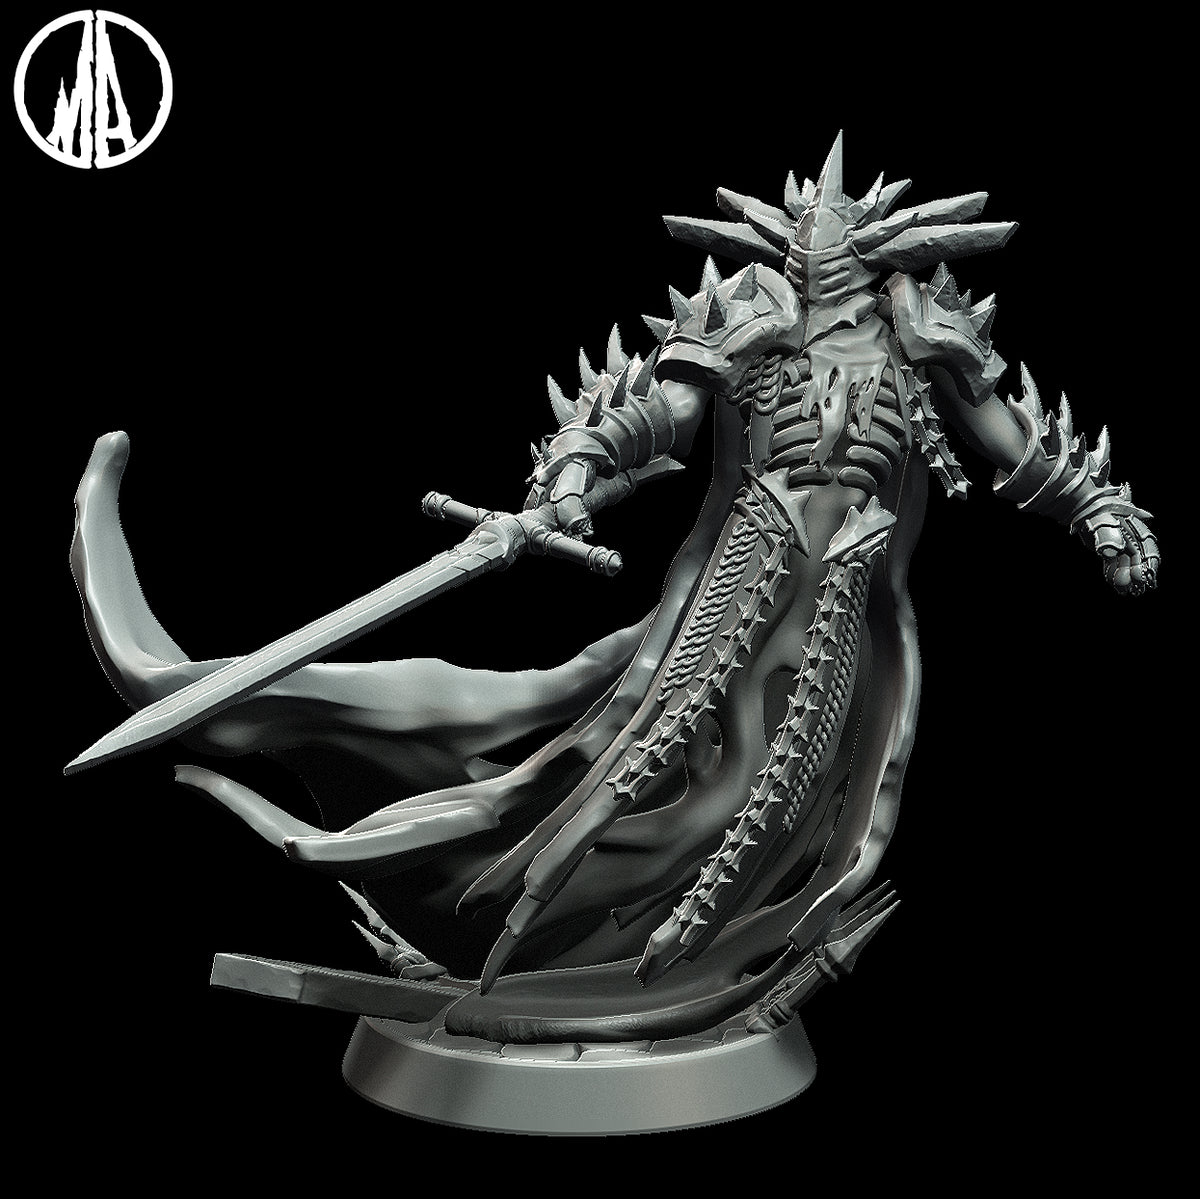 Vile Knight | 32mm Scale Resin Model | From the Lost Souls Collection